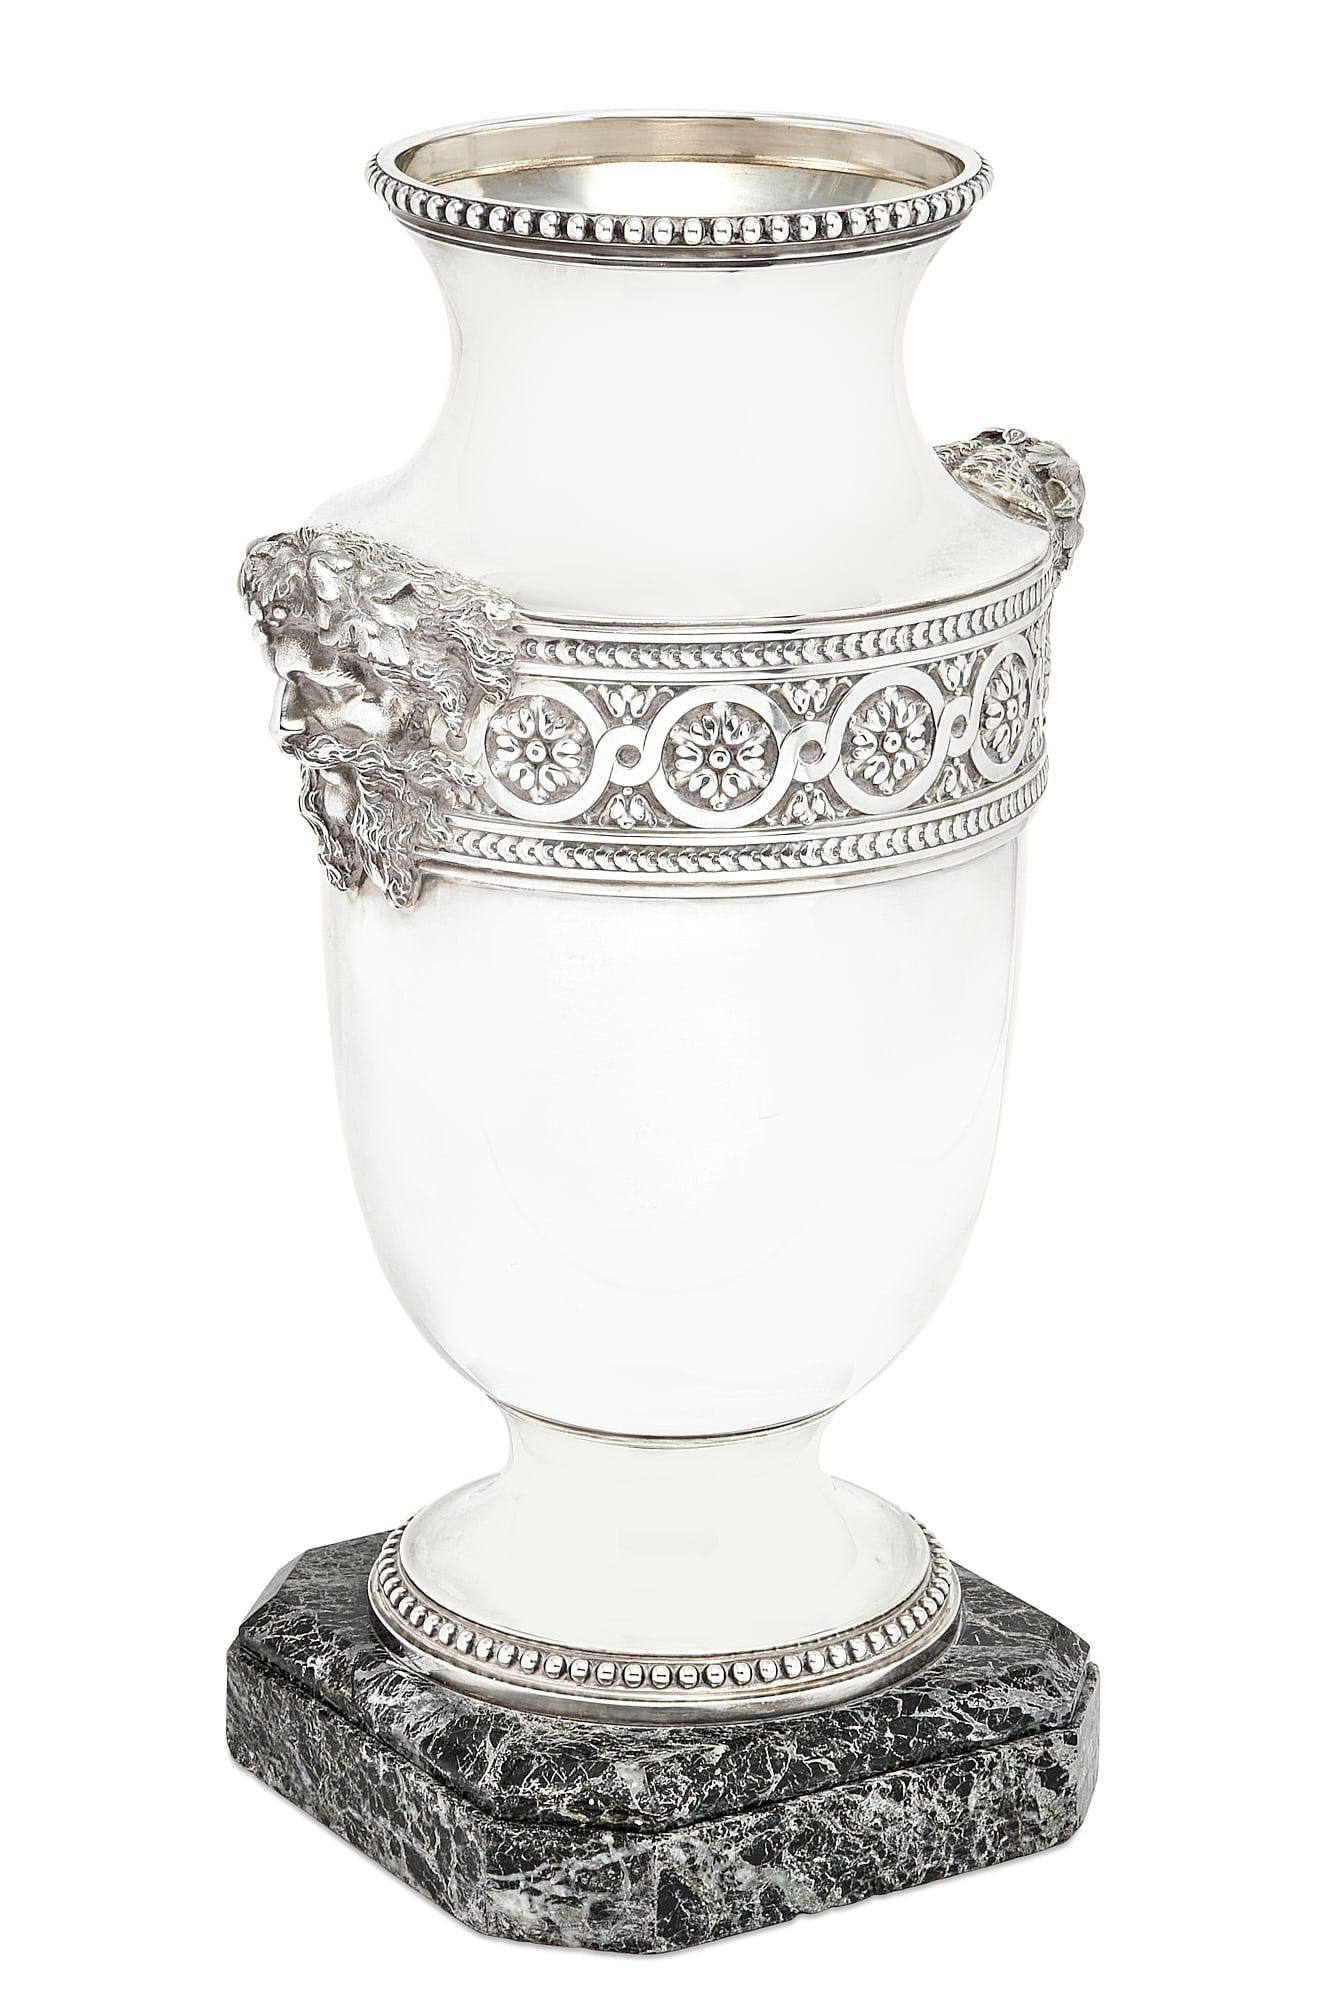 A FRENCH NEOCLASSICAL STYLE SILVER 2fb3153